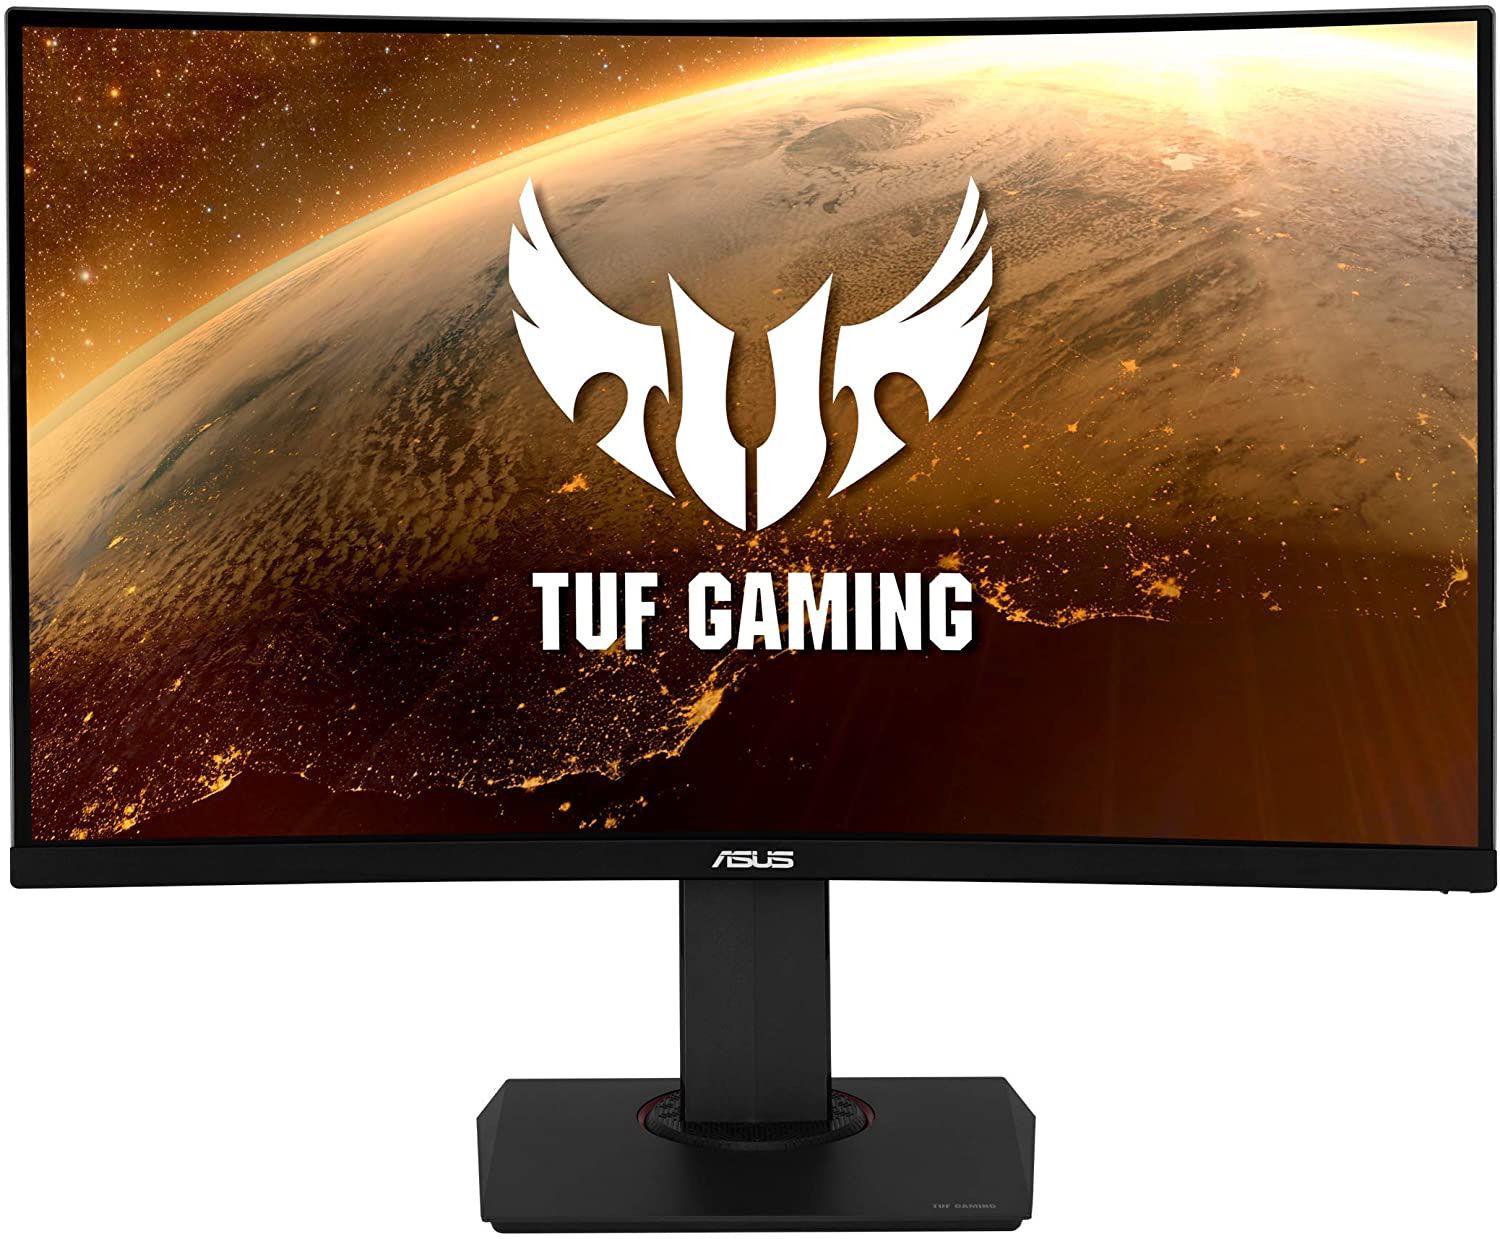 Asus TUF Gaming VG32VQ 32” Curved Gaming Monitor FreeSync HDR Elmb Sync 1440P 144Hz 1ms Eye Care with DP HDMI